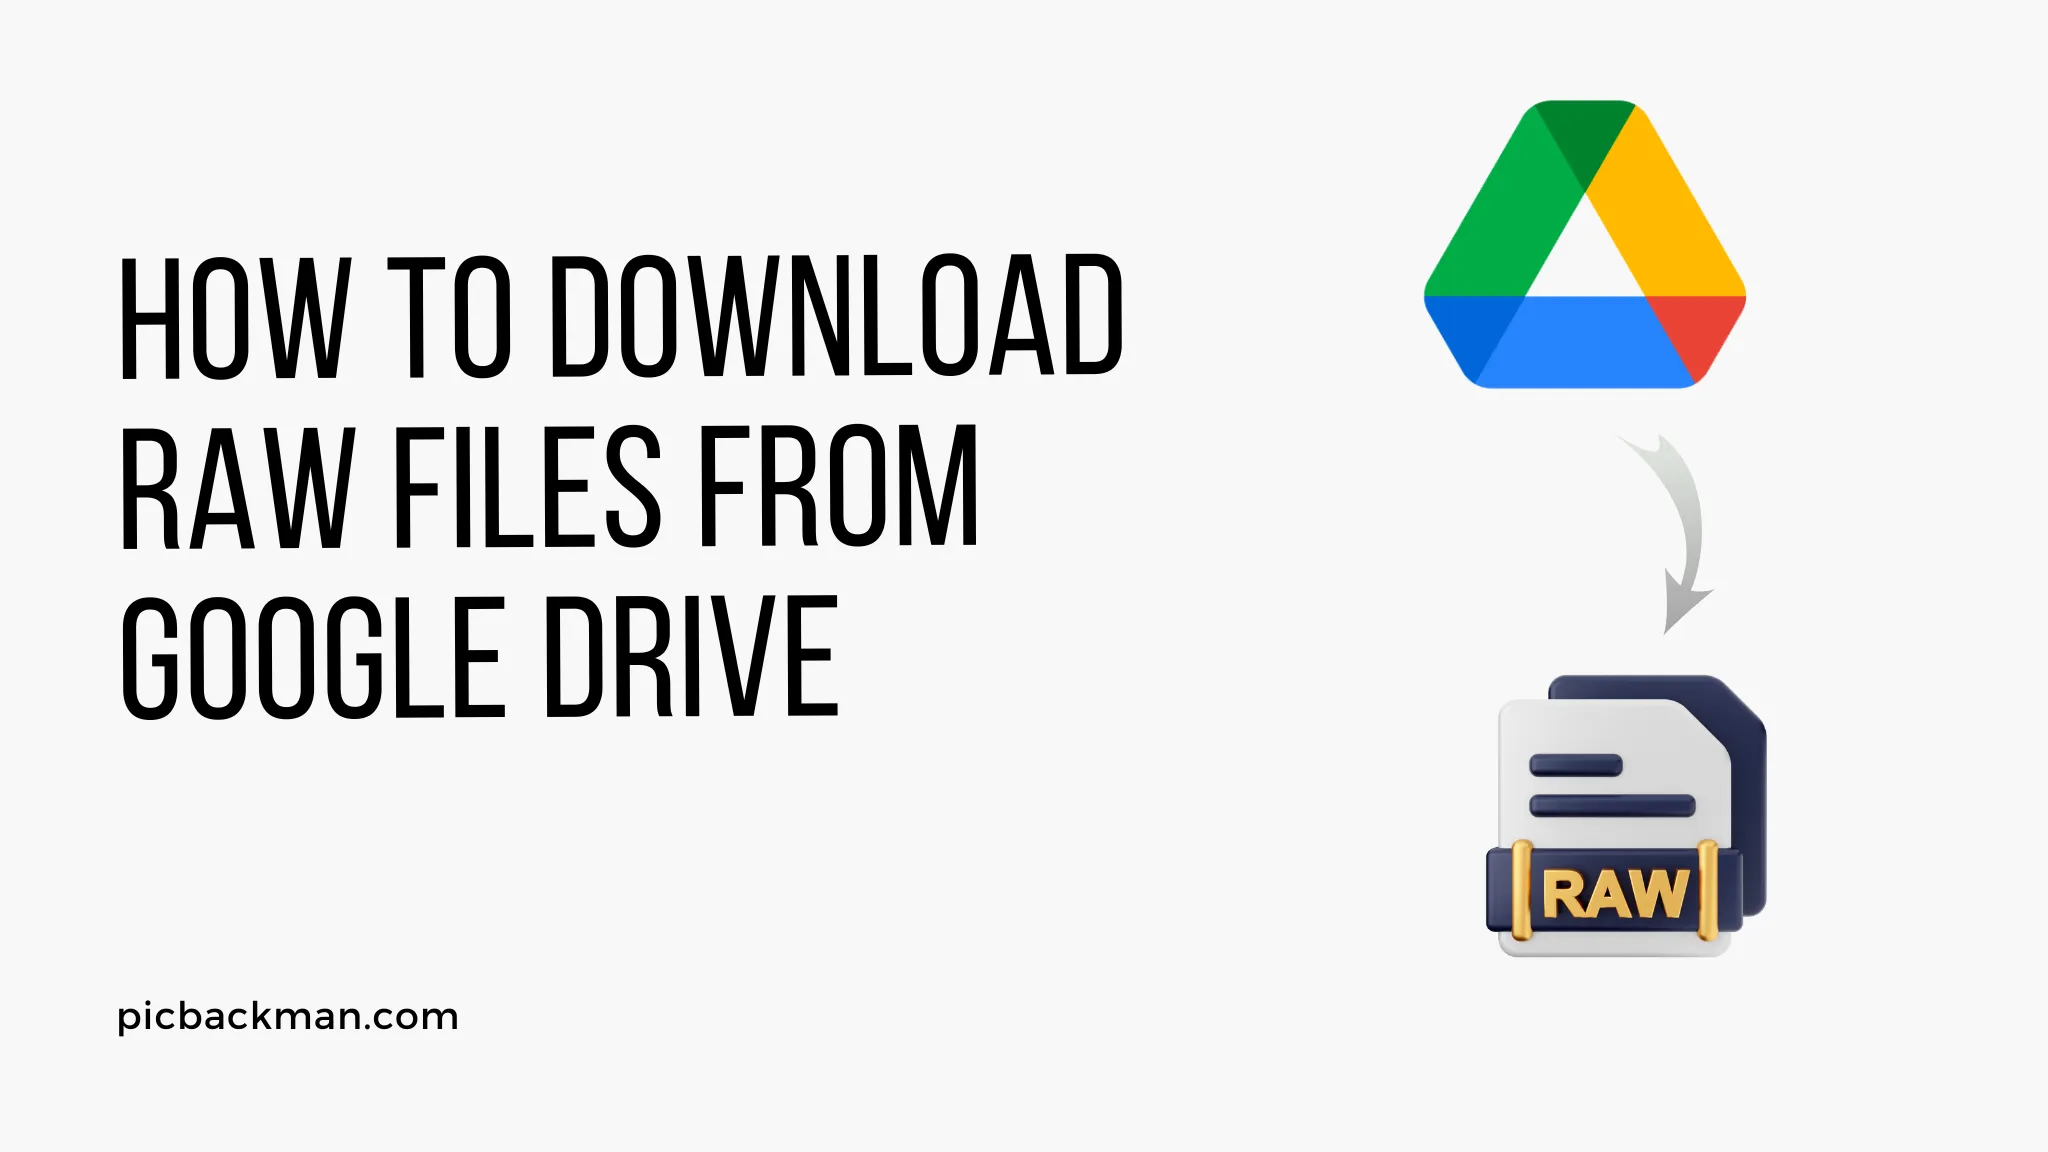 How to Download RAW Files from Google Drive?